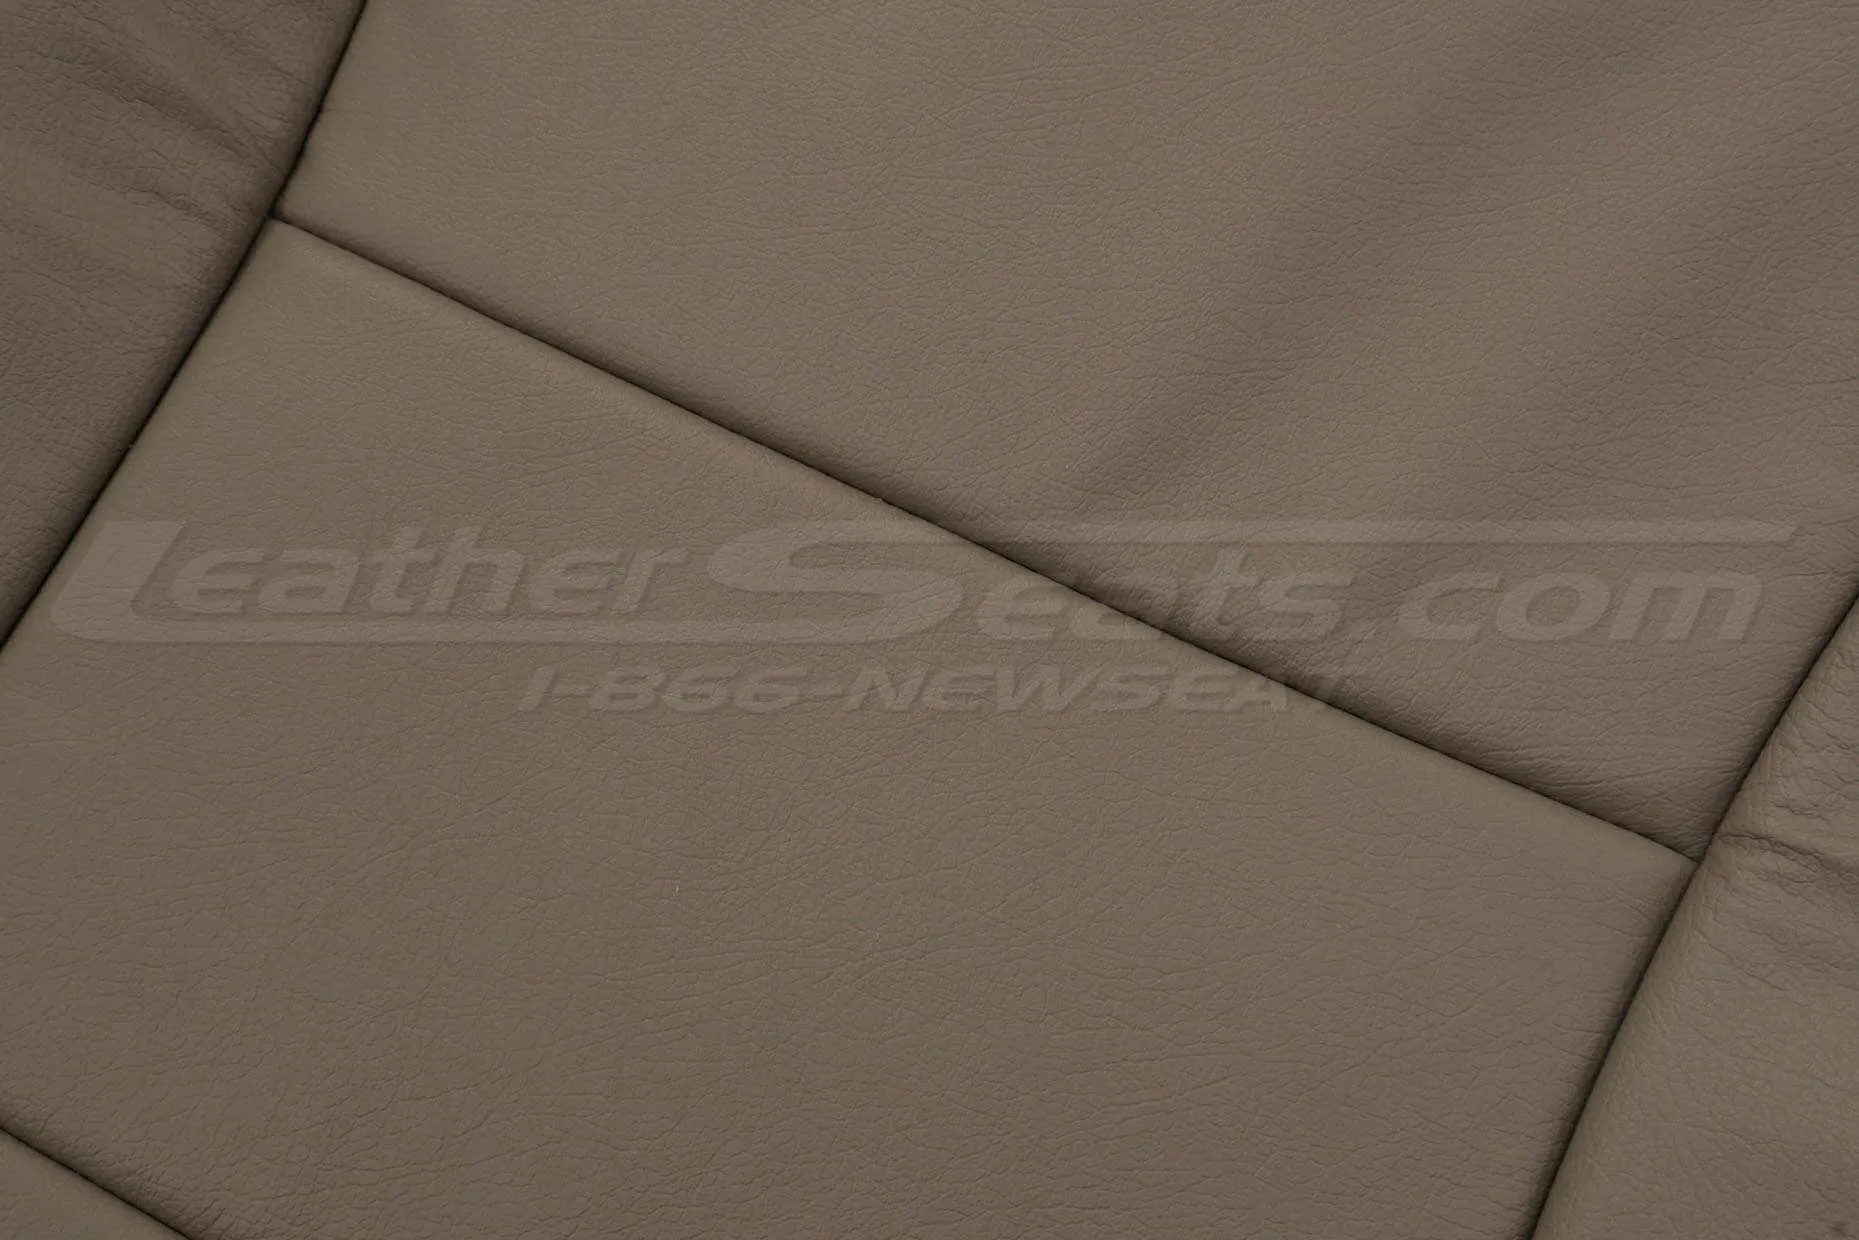 Leaher texture and backrest insert close-up